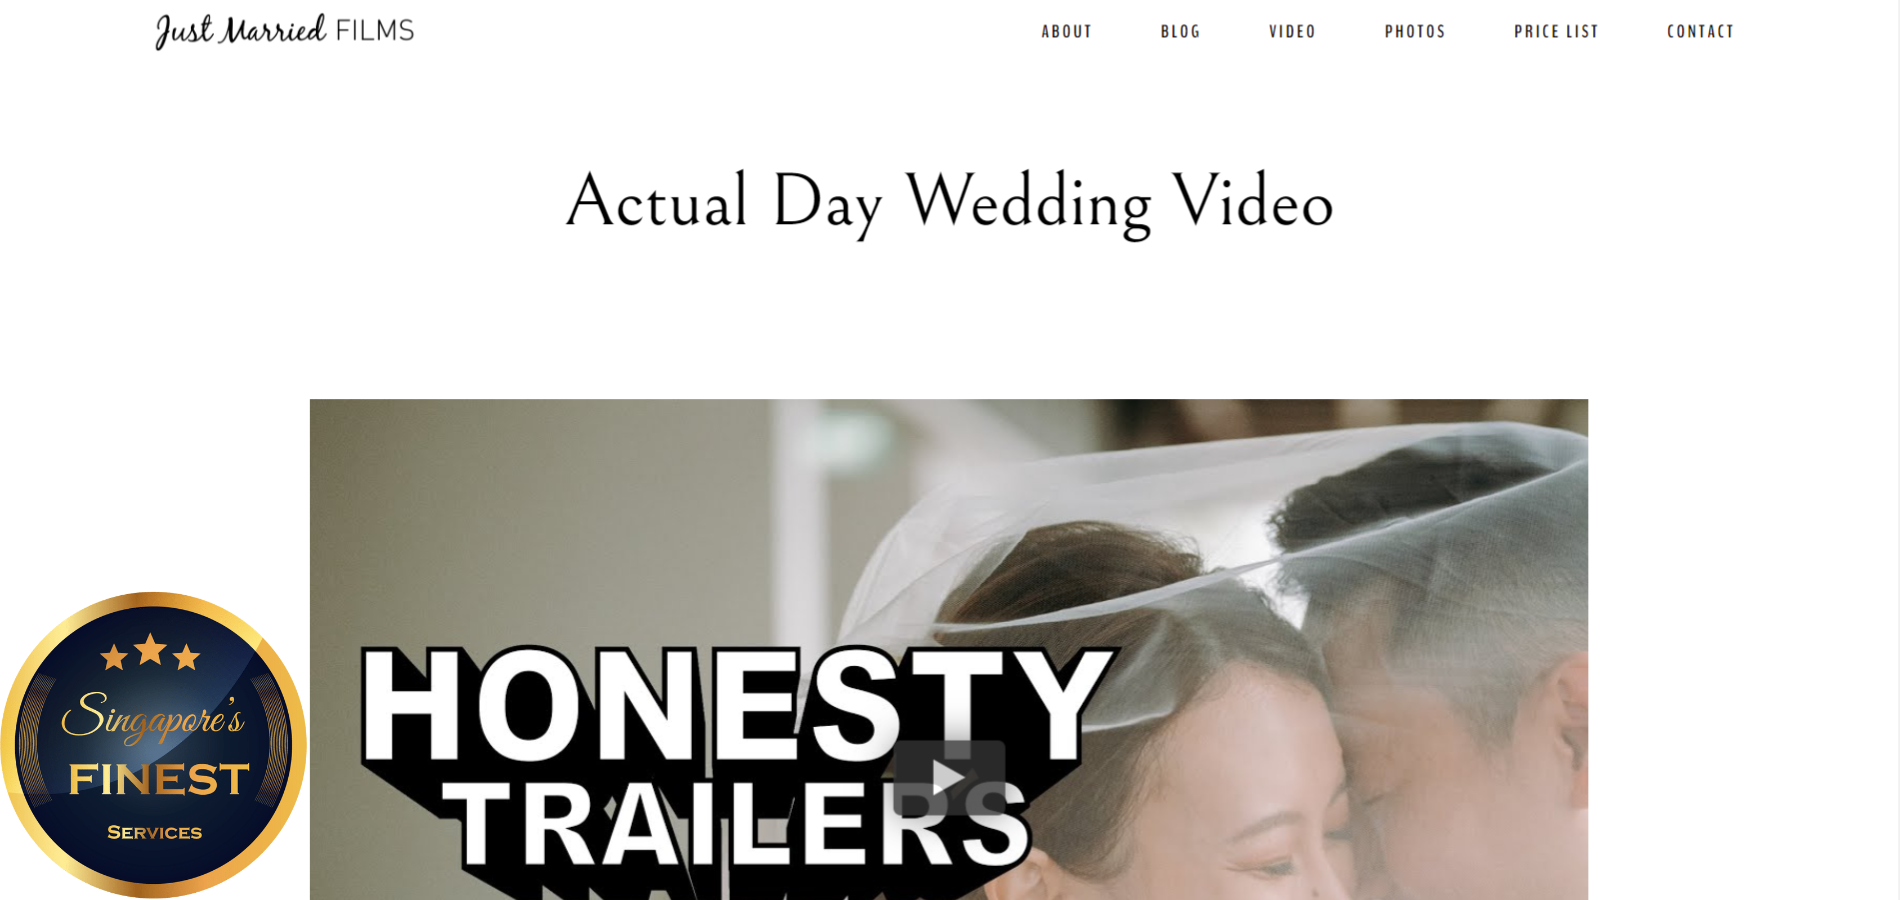 The Finest Wedding Videographers in Singapore